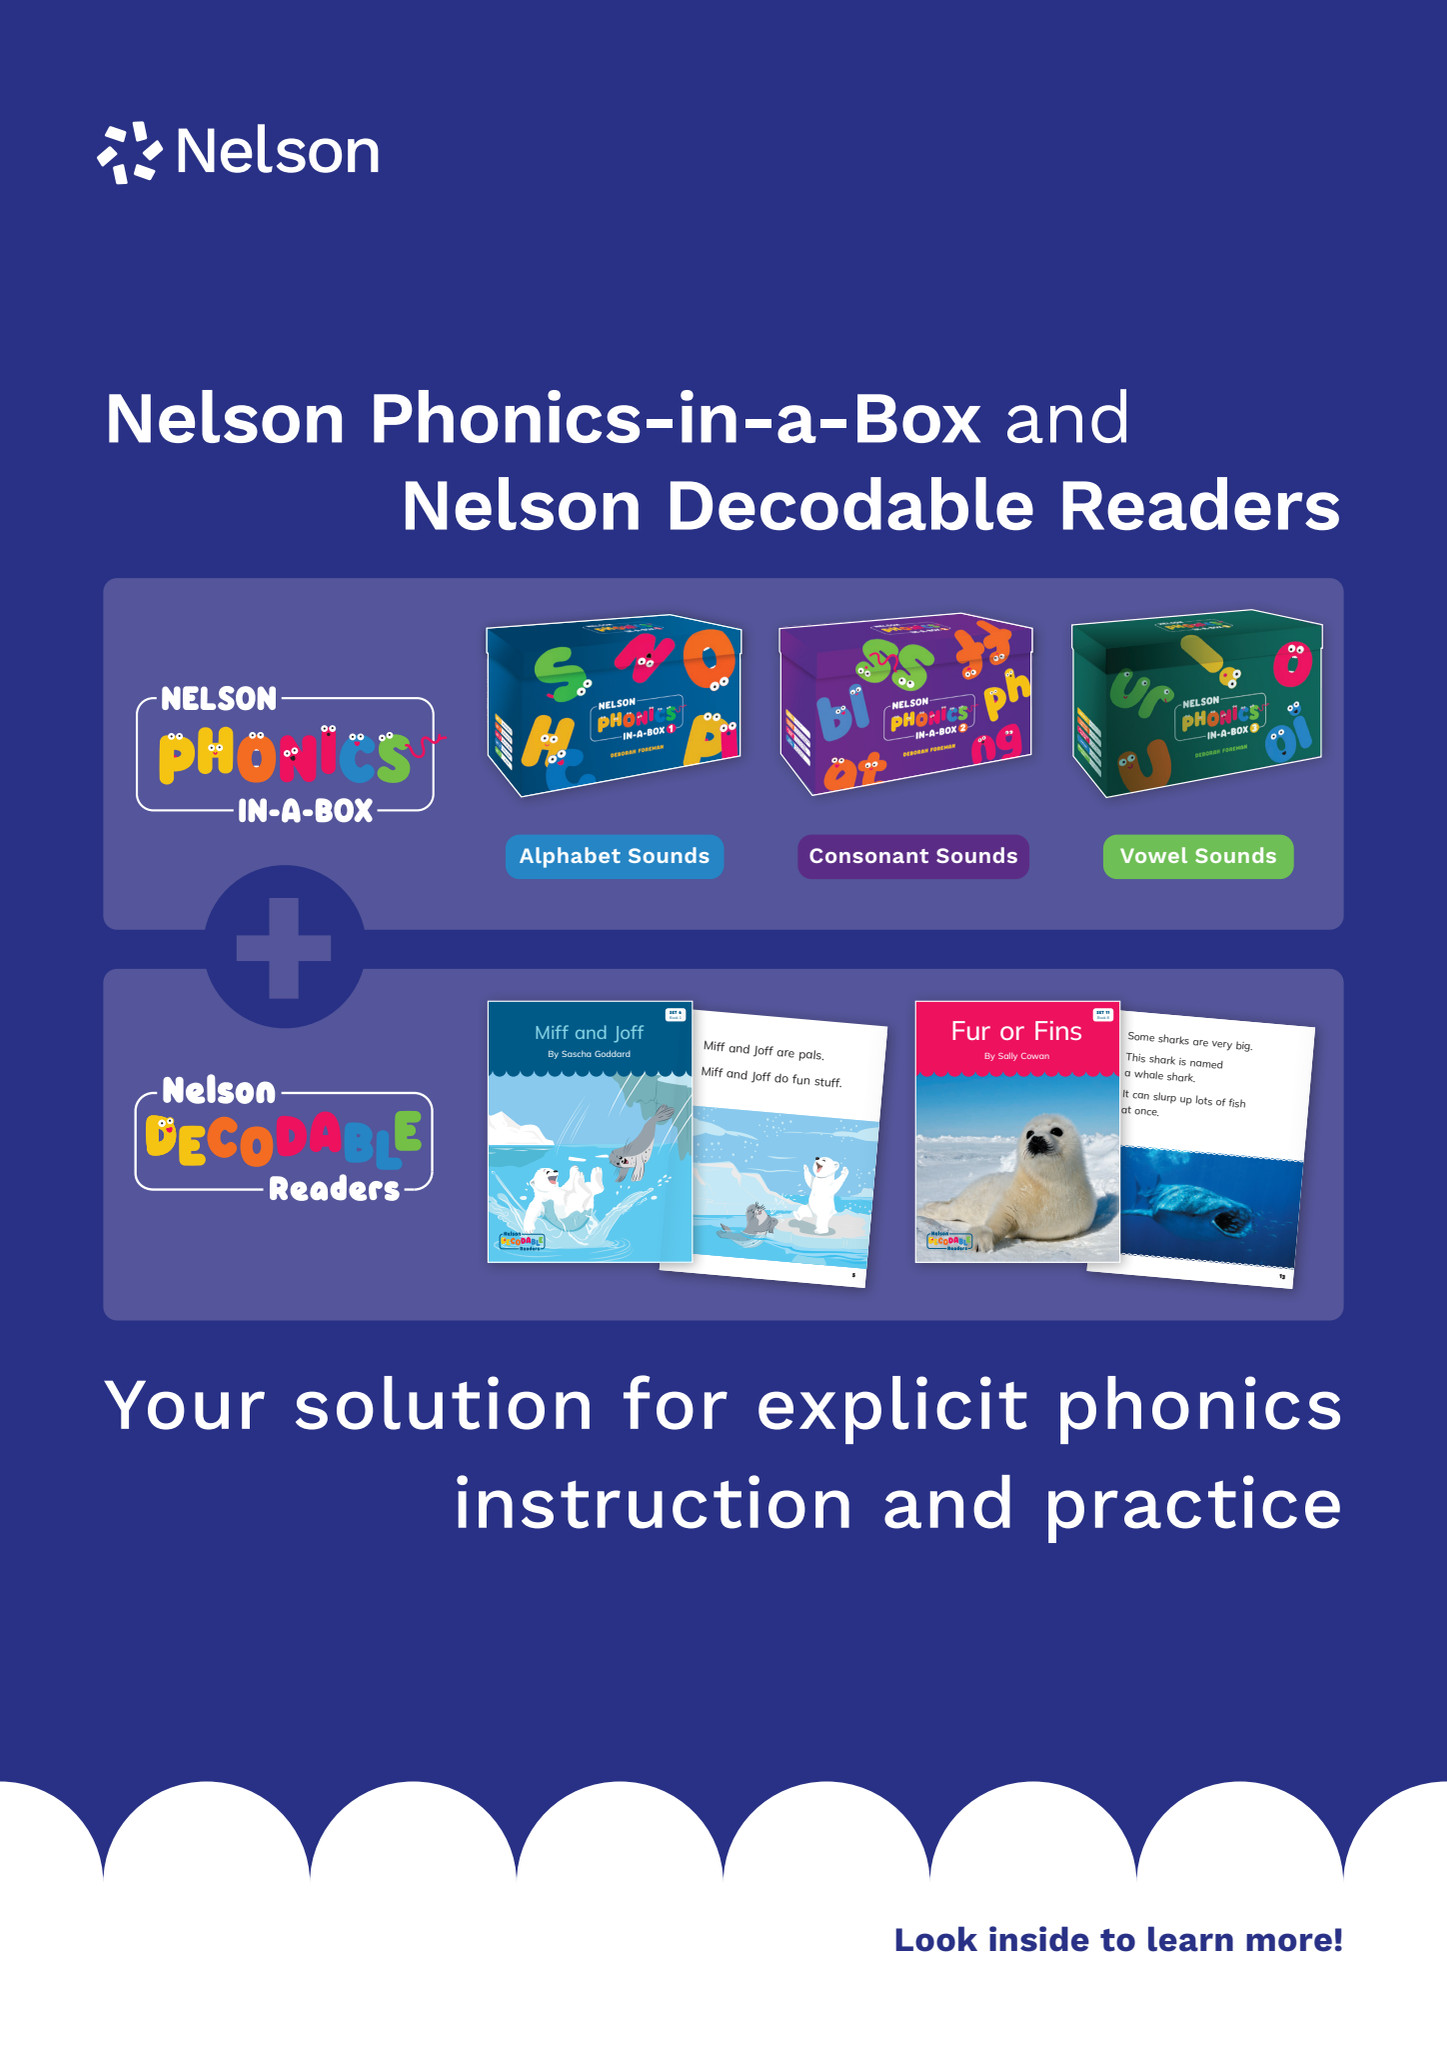 Nelson Decodable Readers + Nelson Phonics-in-a-Box Brochure